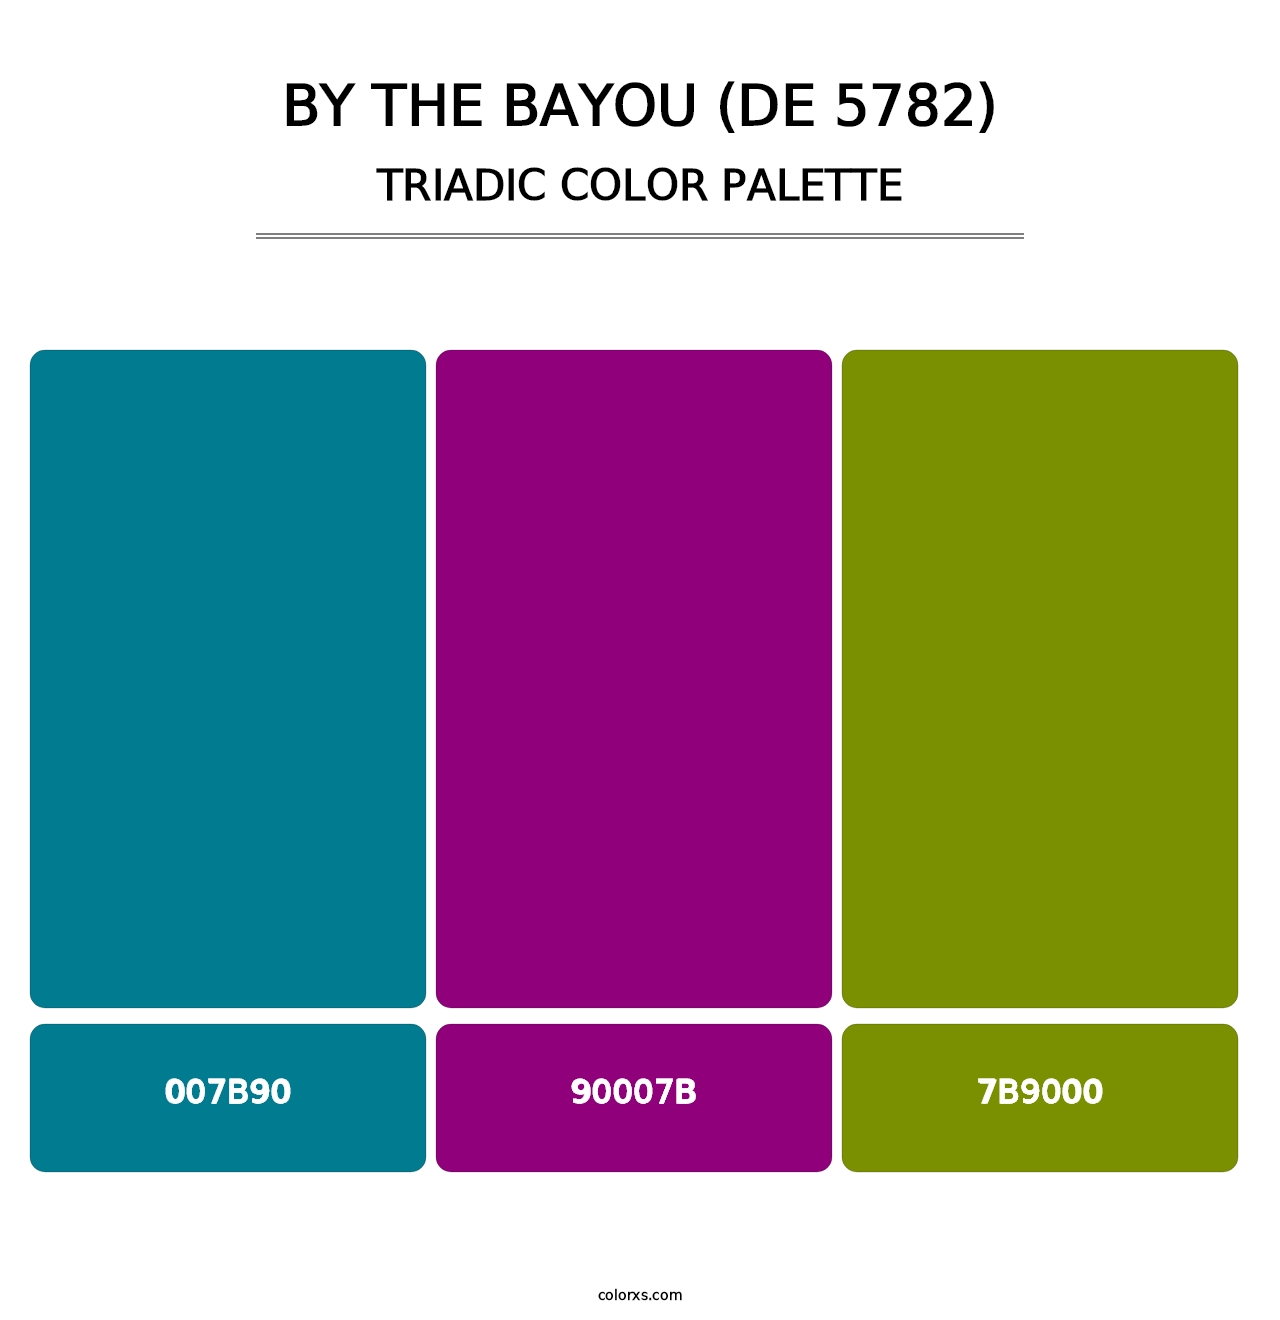 By the Bayou (DE 5782) - Triadic Color Palette